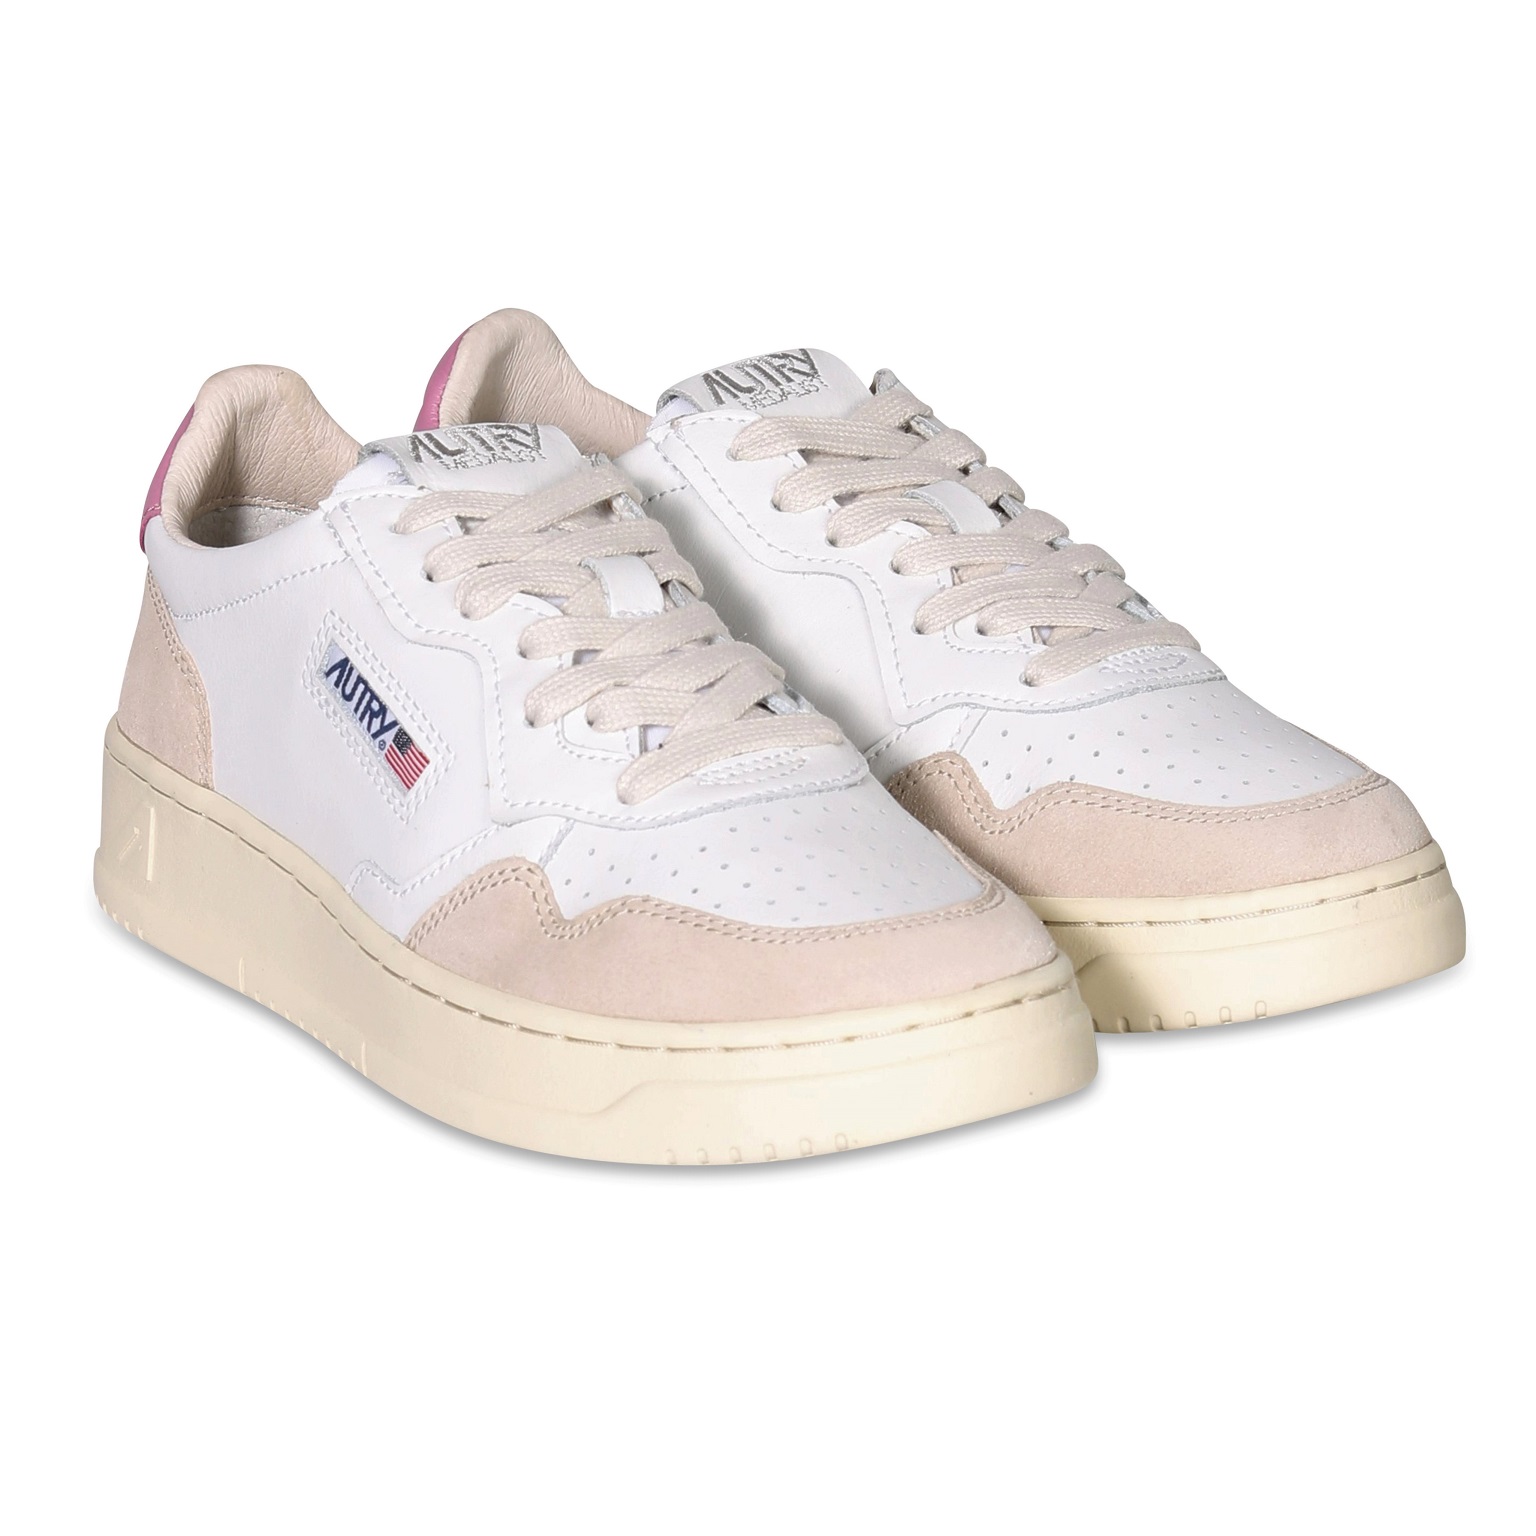 AUTRY ACTION SHOES Low Sneaker in Beige Suede/White/Pink 35